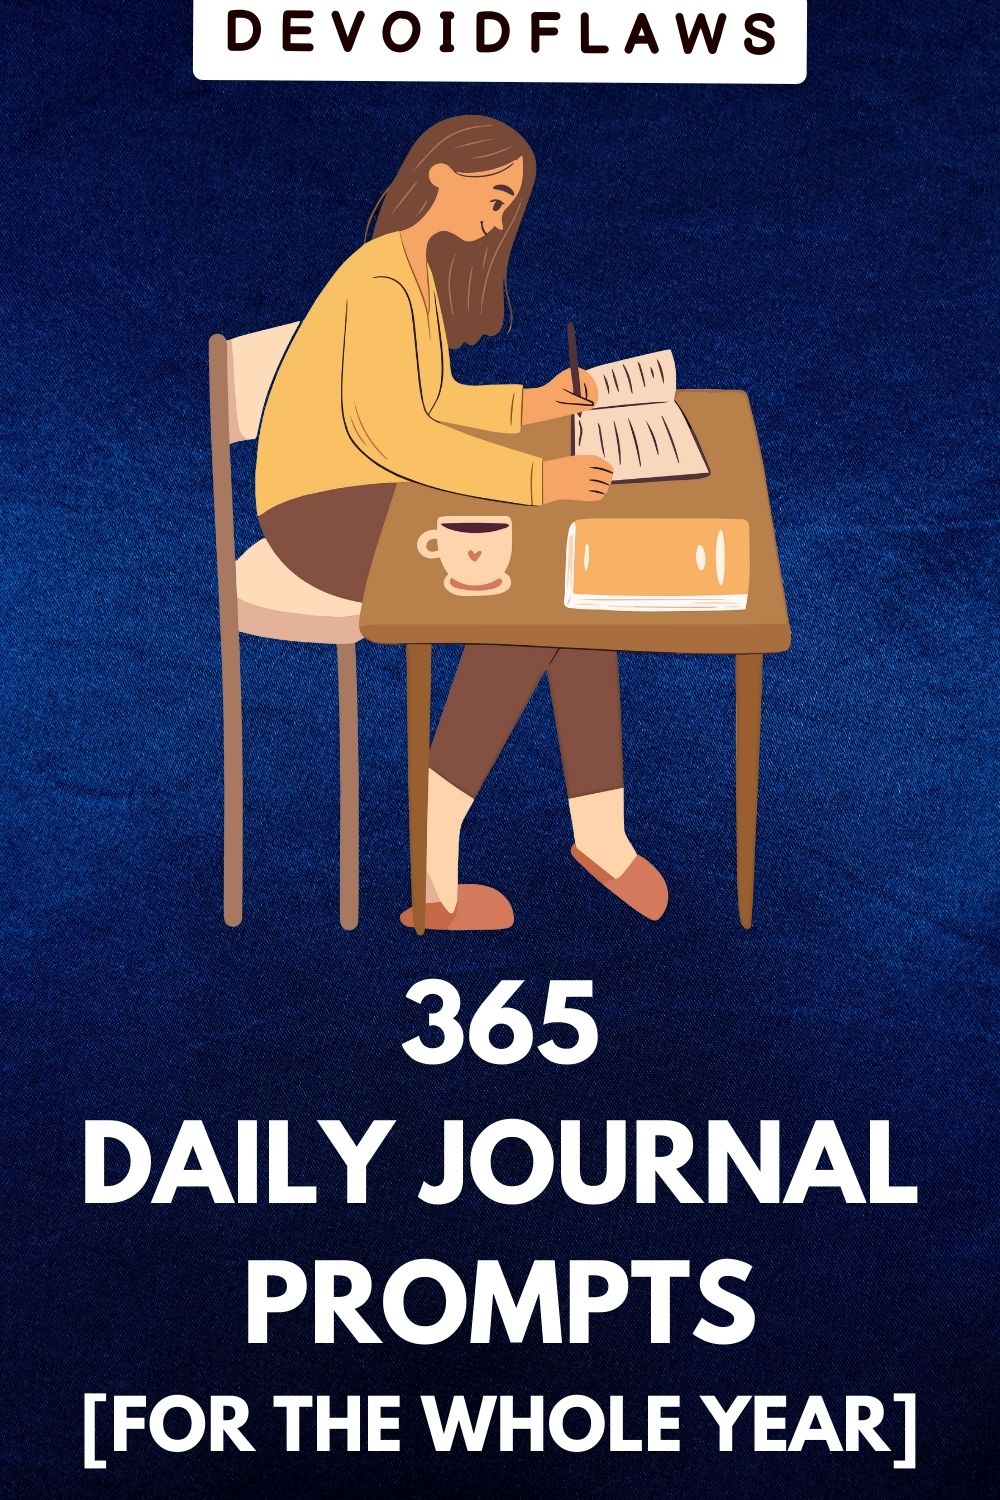 365 daily journal prompts